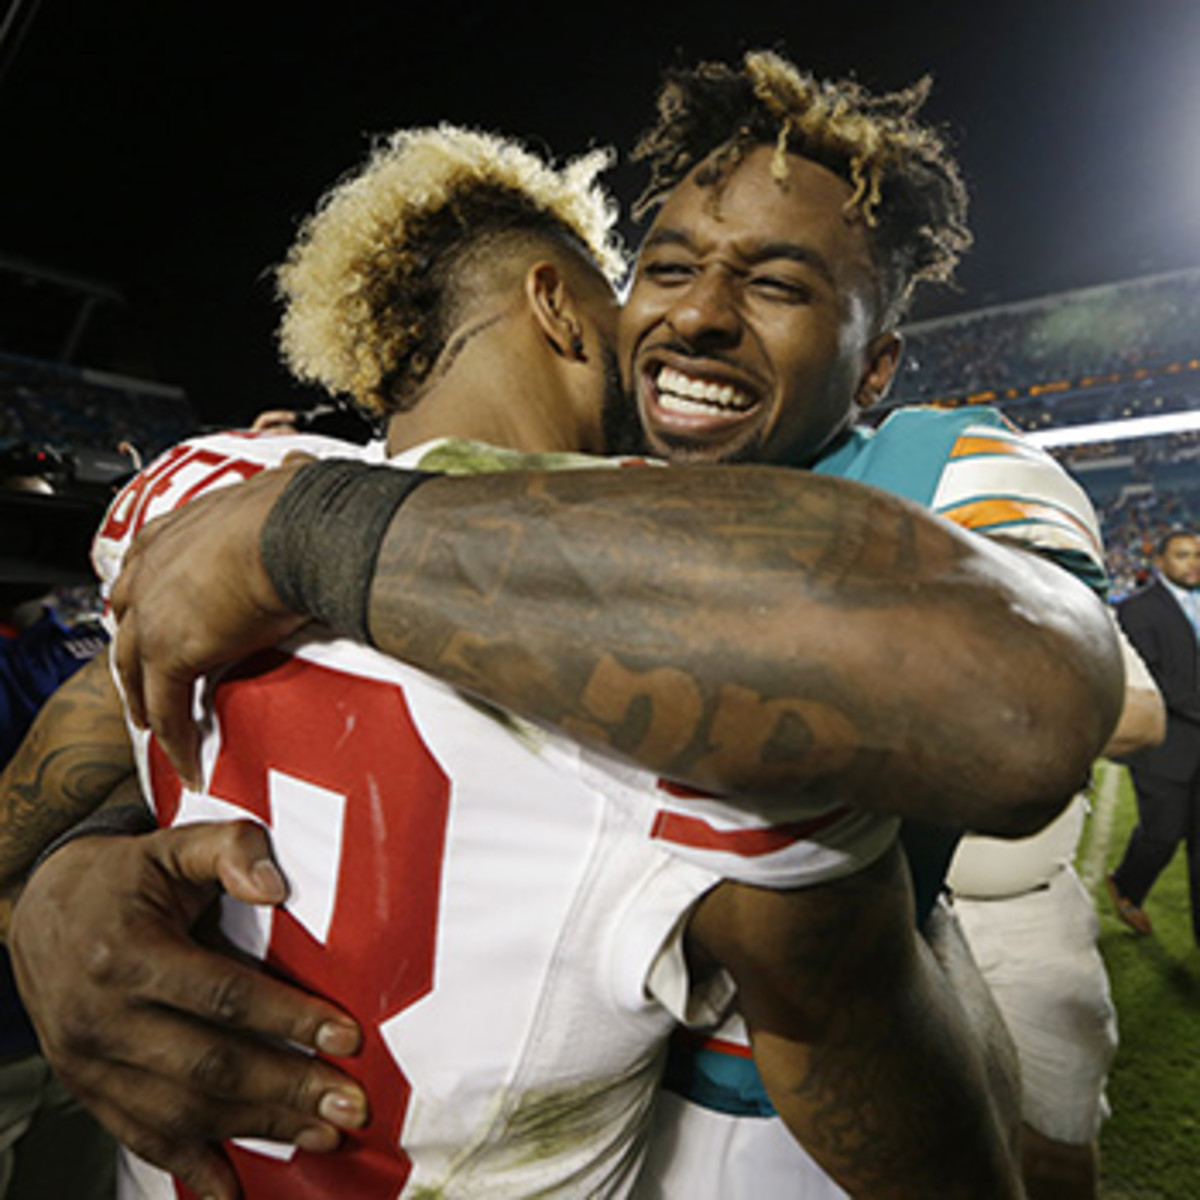 Landry, who played with Odell Beckham Jr. at LSU, is sometimes viewed as OBJ’s sidekick.